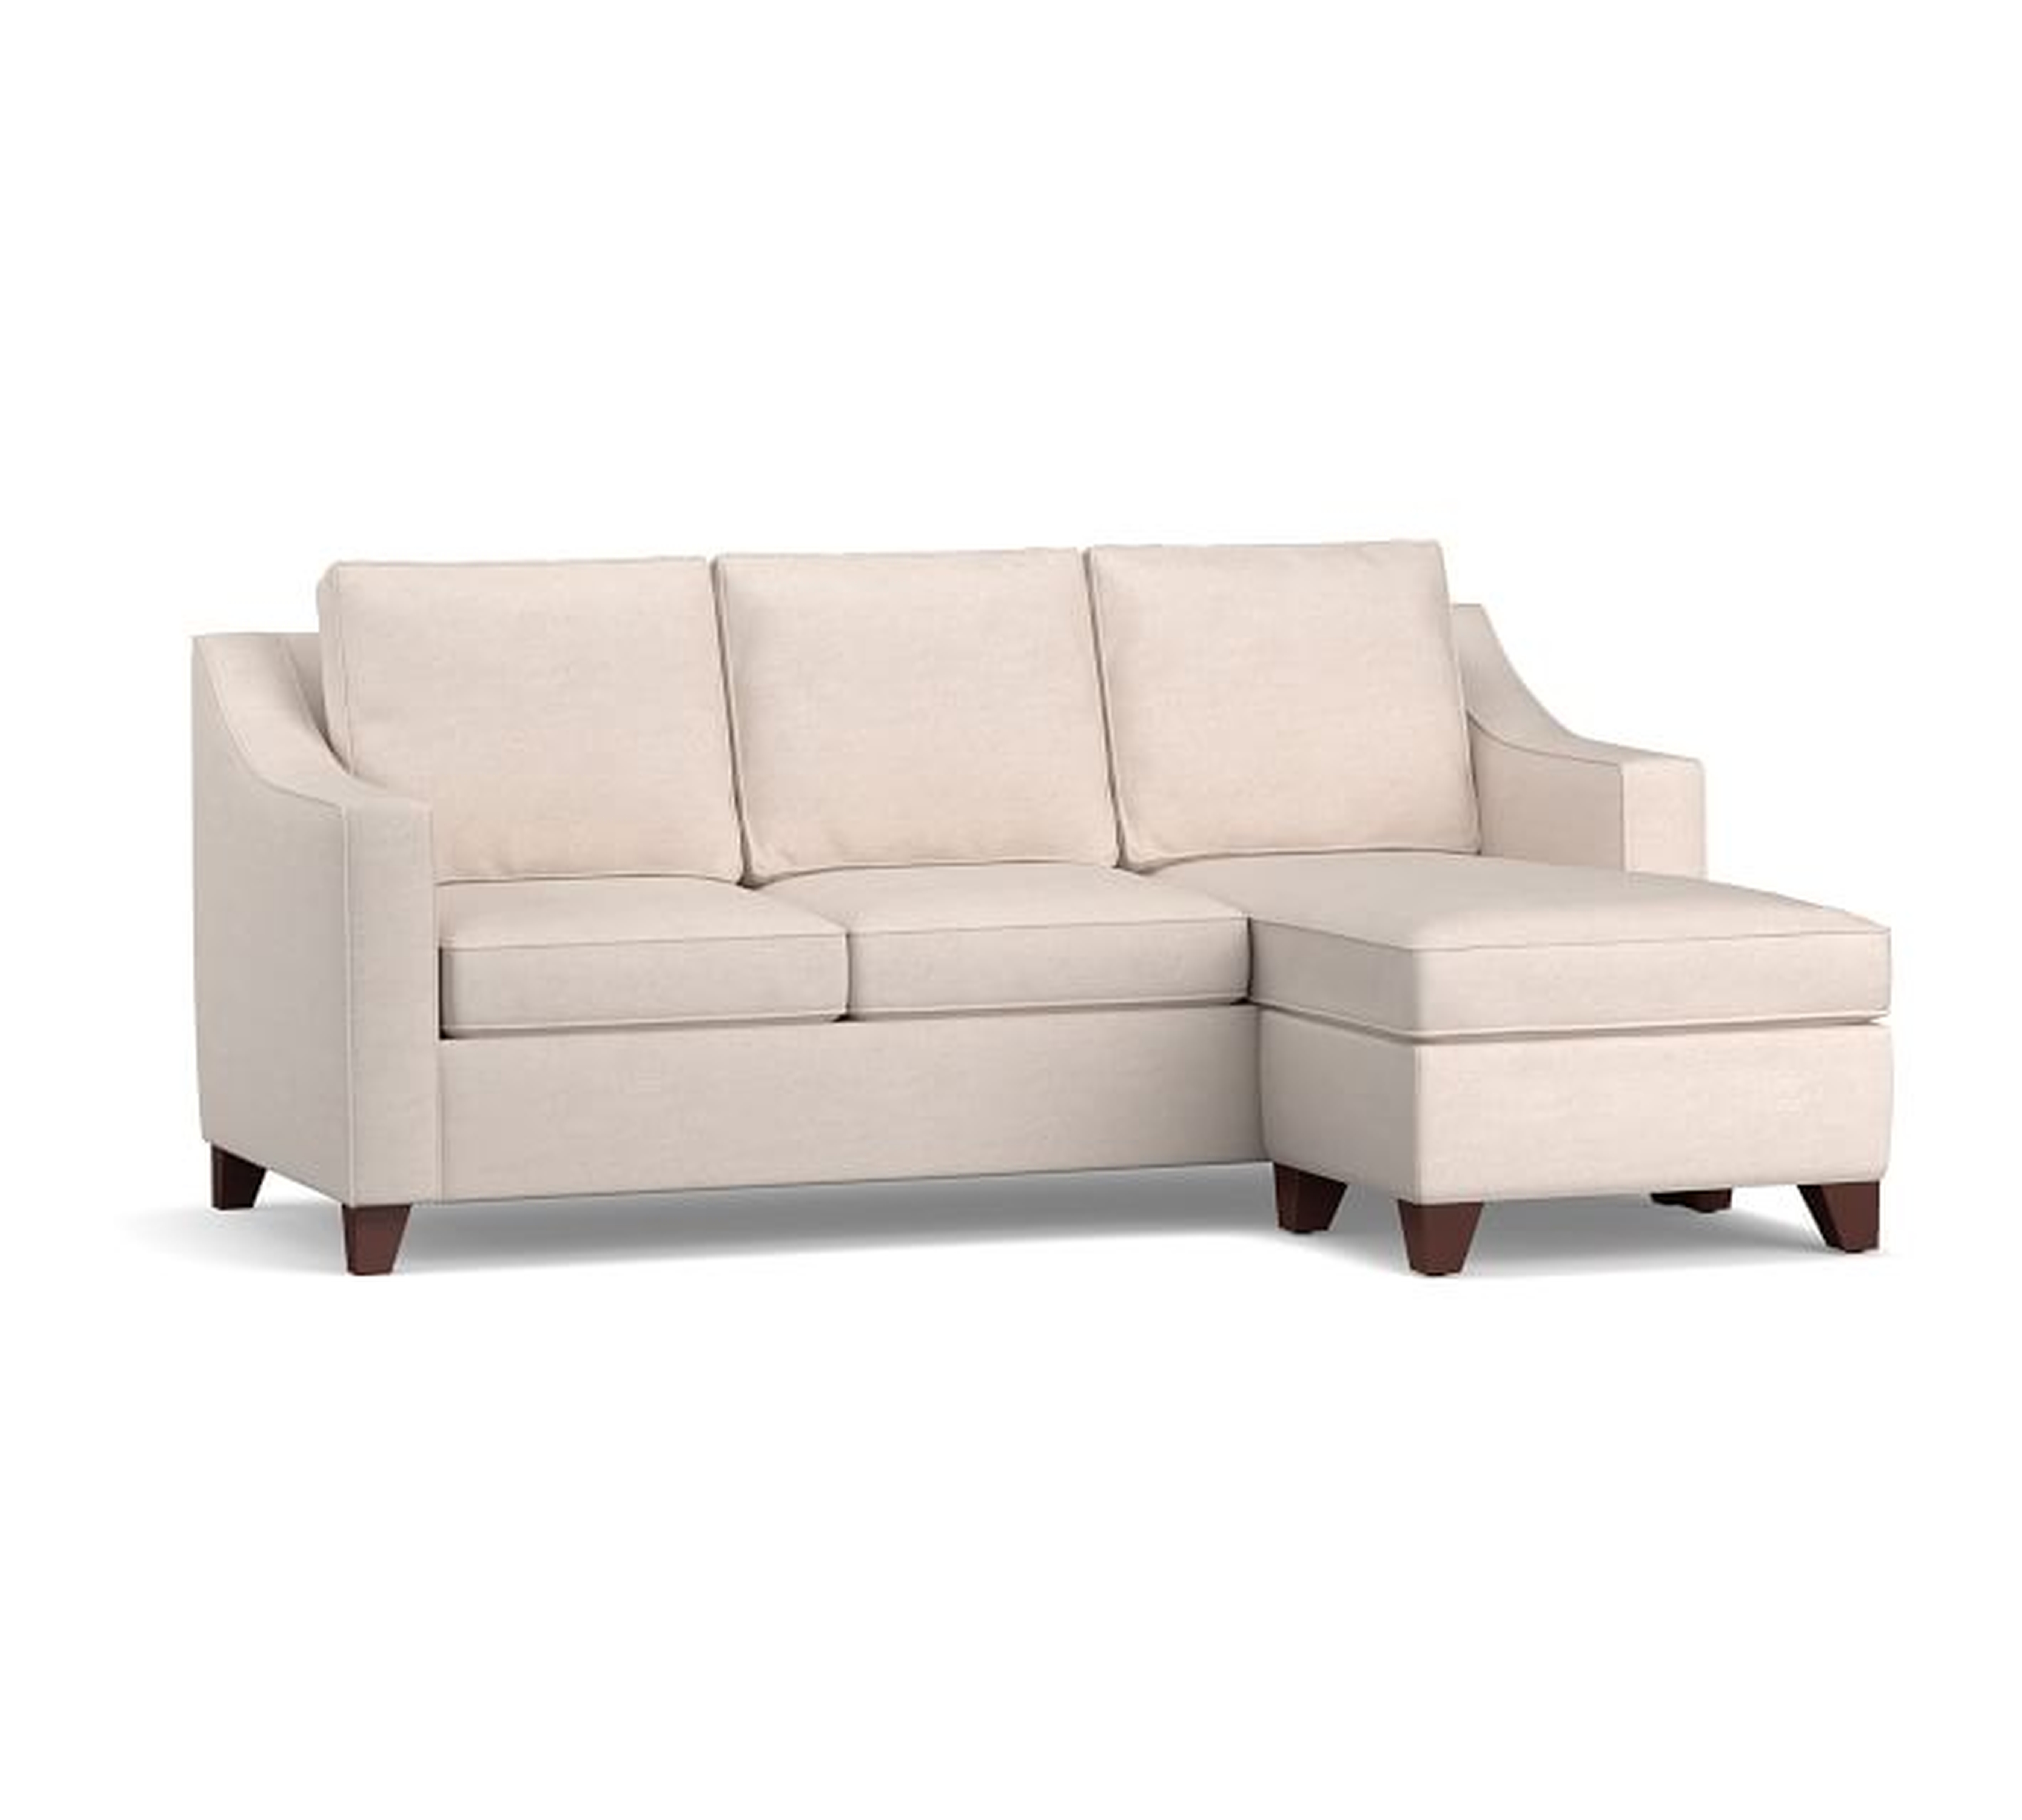 Cameron Slope Arm Upholstered Sleeper Sofa with Reversible Storage Chaise Sectional, Polyester Wrapped Cushions, Performance Heathered Tweed Pebble - Pottery Barn